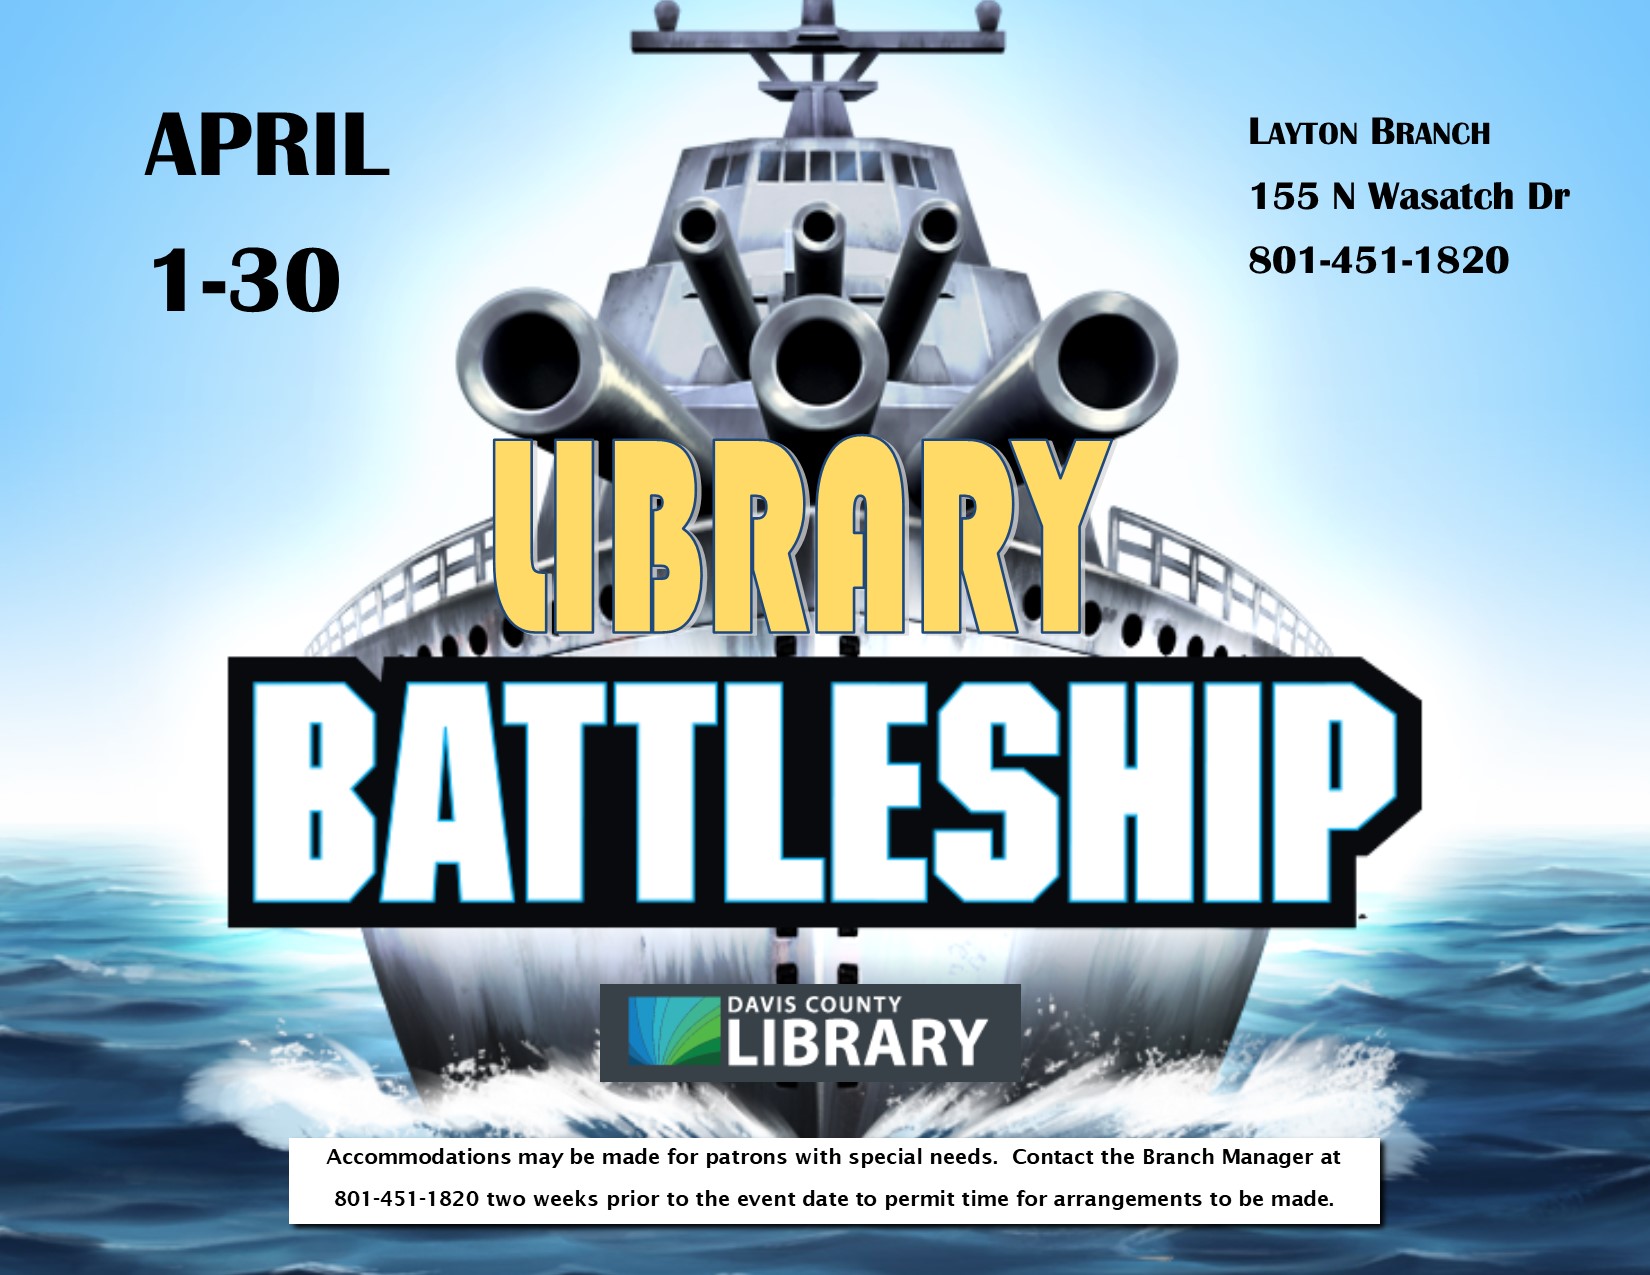 Library Battleship at the Layton Library. April 1st through the 30th.  Earn hits and get a prize if you sink a ship!